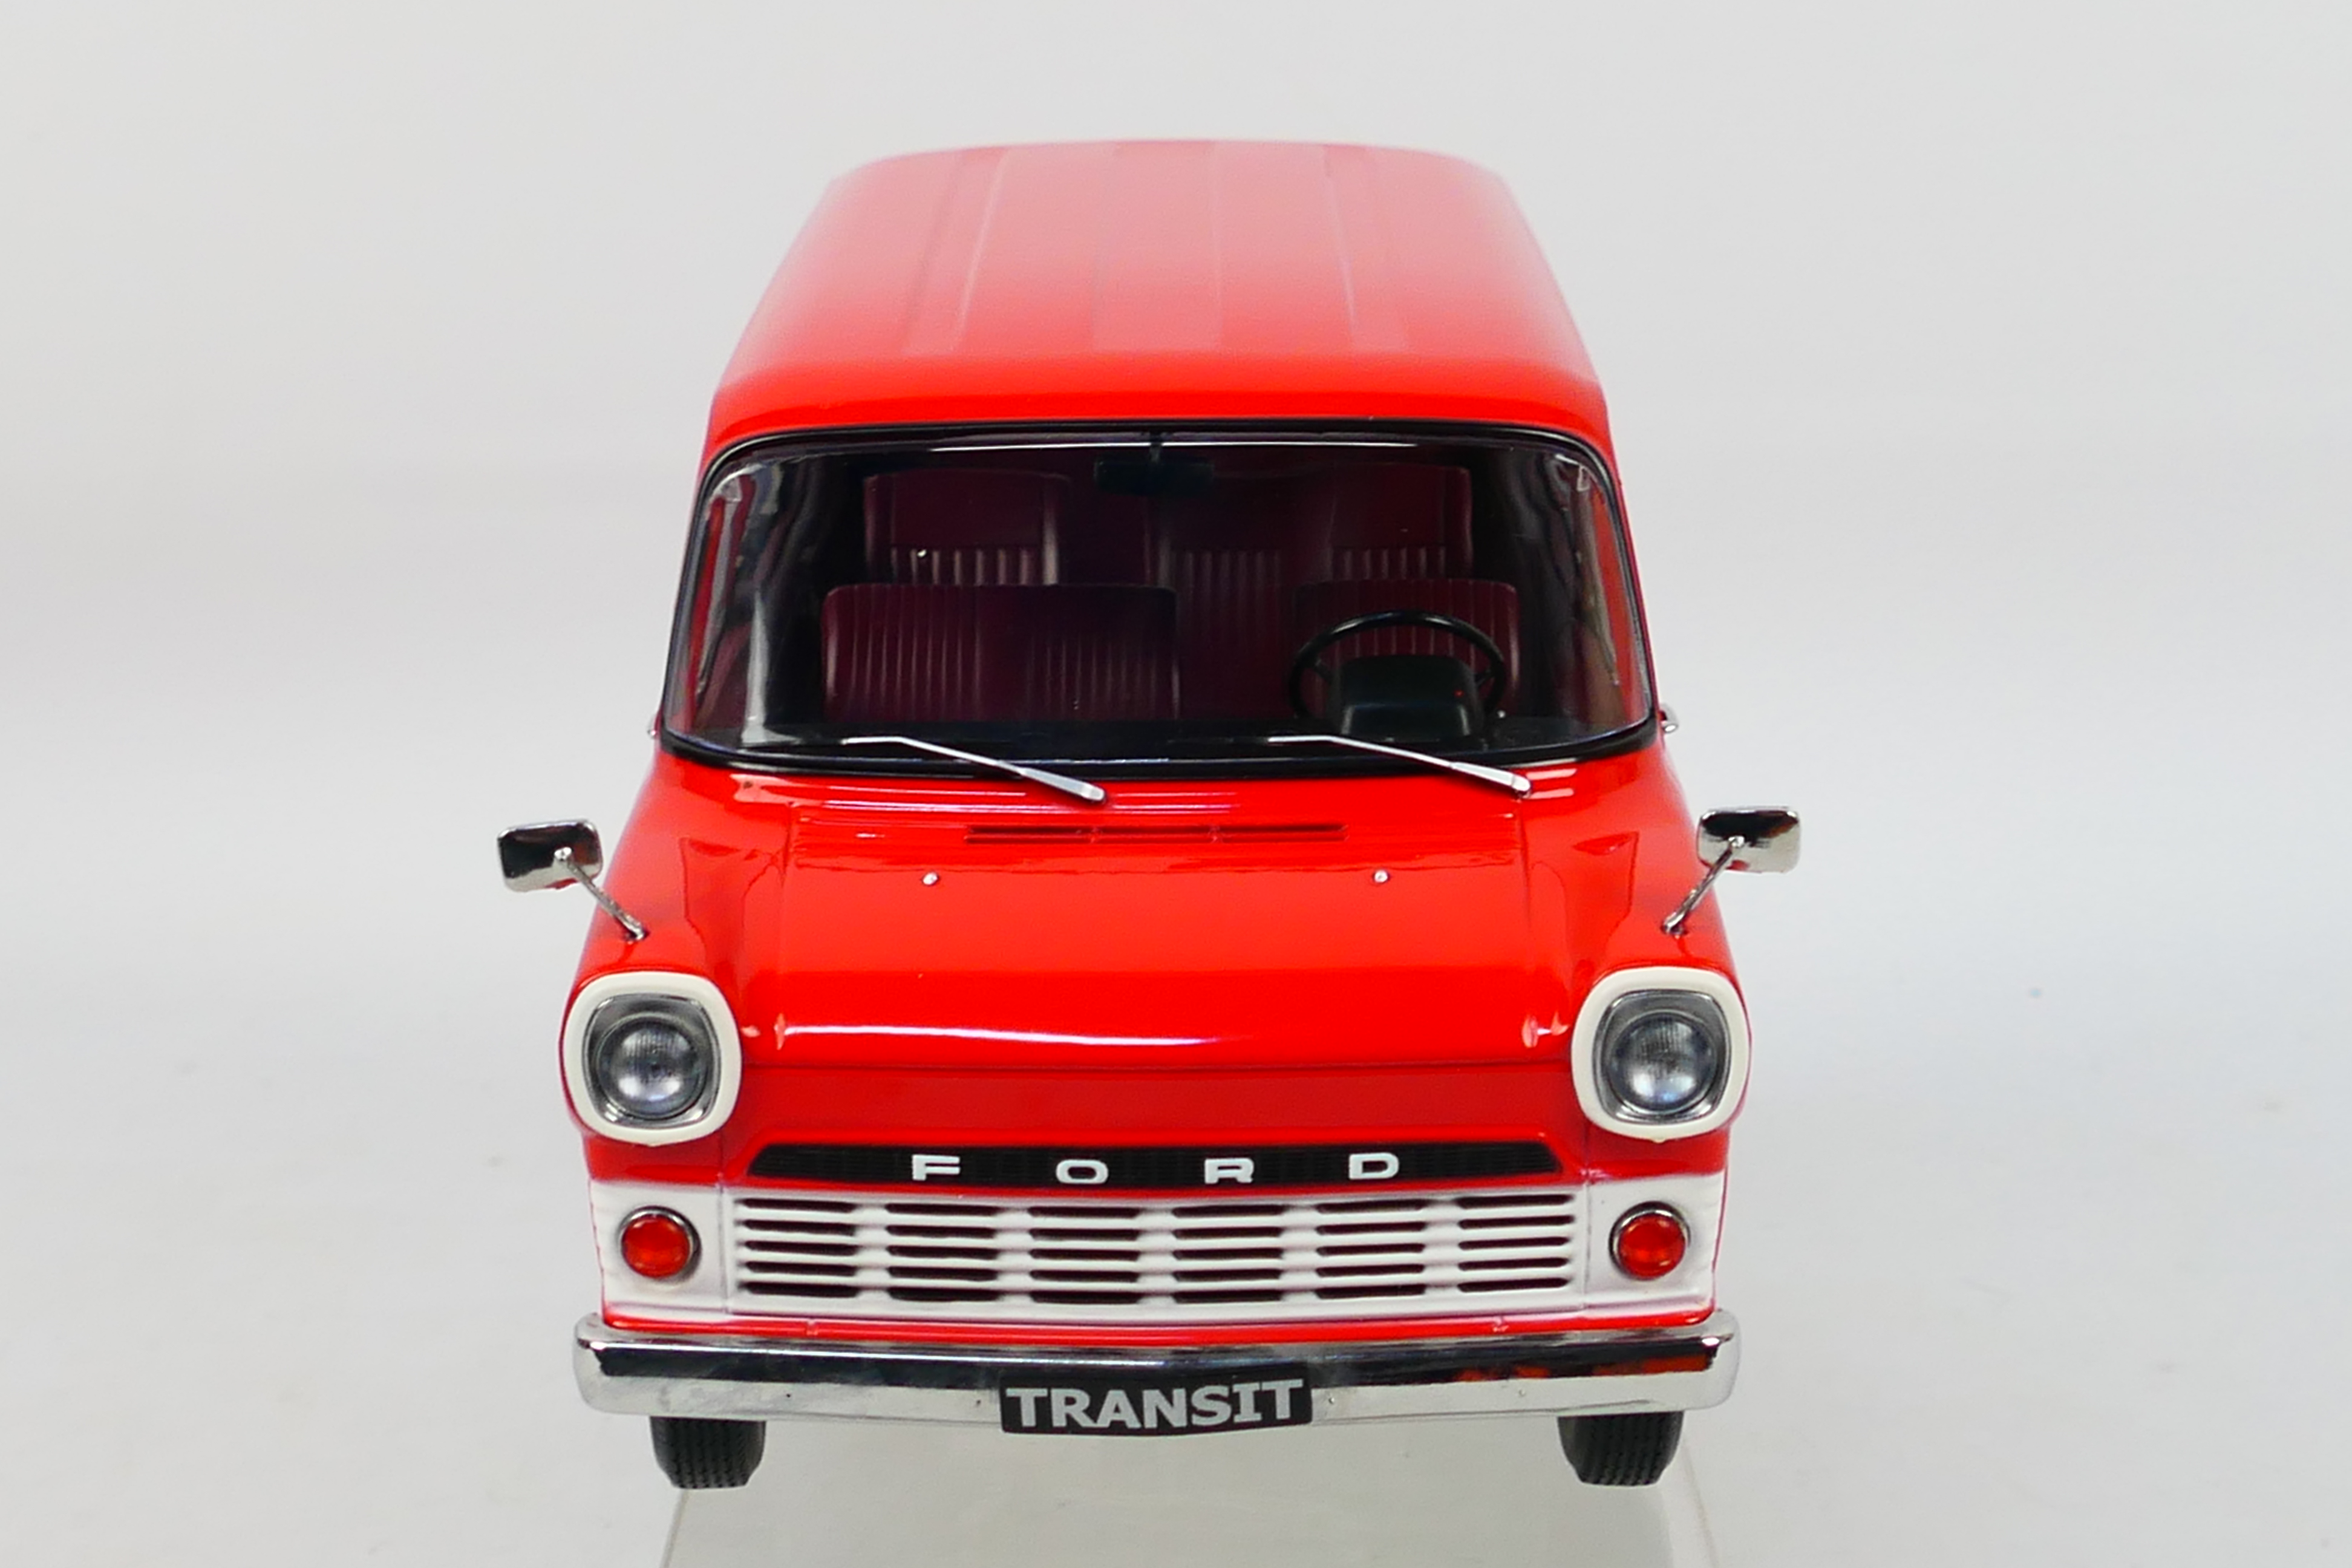 KK scale - A boxed Limited Edition 1:18 scale KK SCale #KKDC180463 1965 Ford Transit Bus. - Image 3 of 5